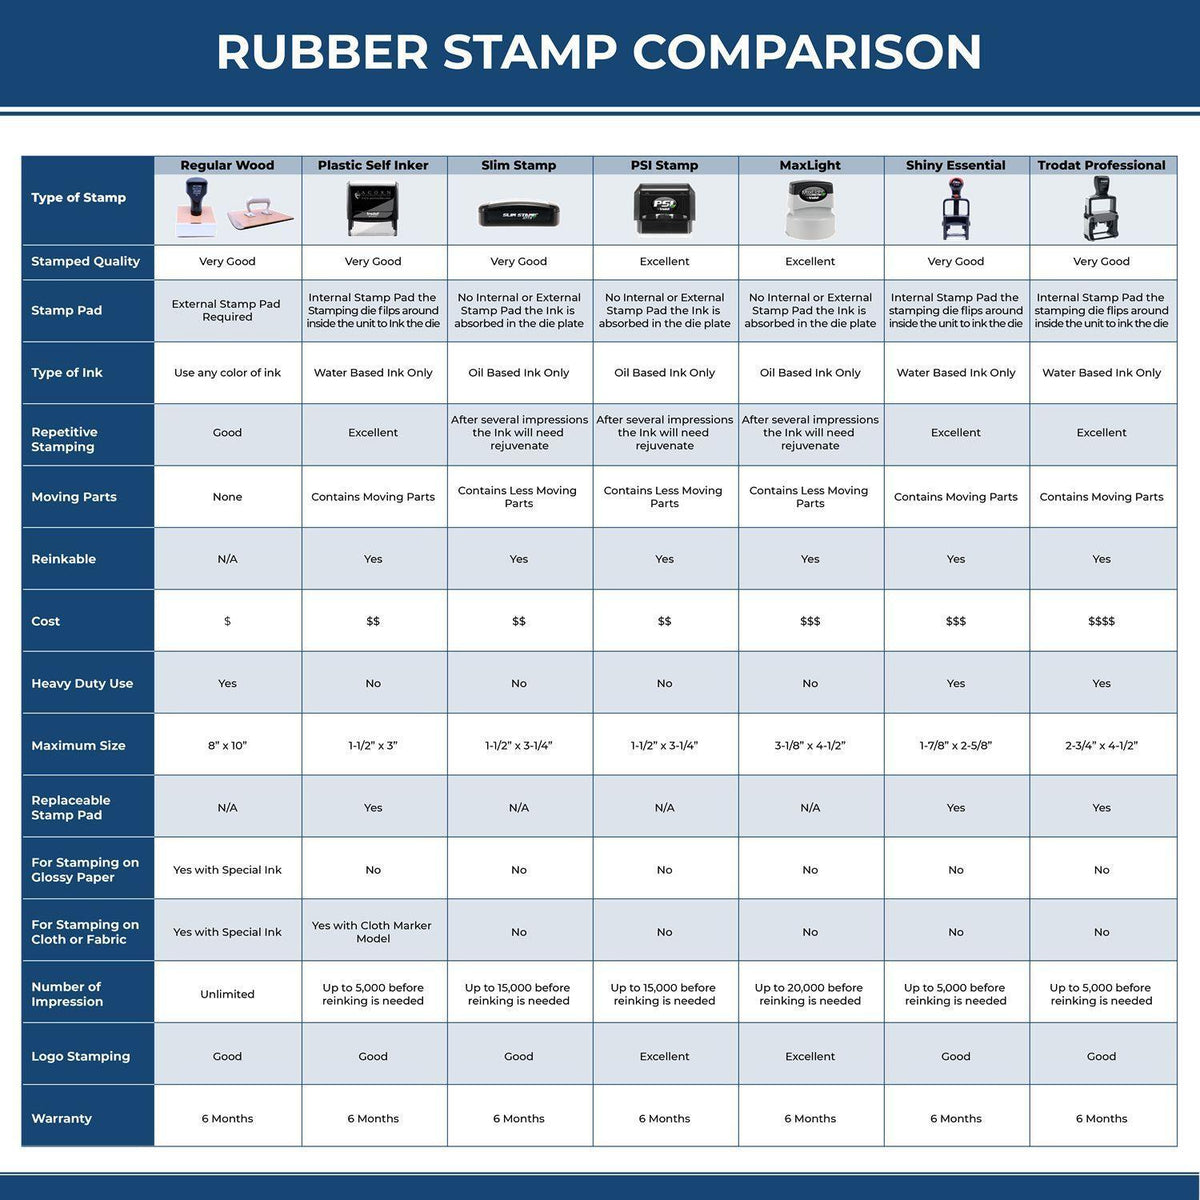 Large Pre-Inked Narrow Font Insurance Verified Stamp 4935SLIM Rubber Stamp Comparison